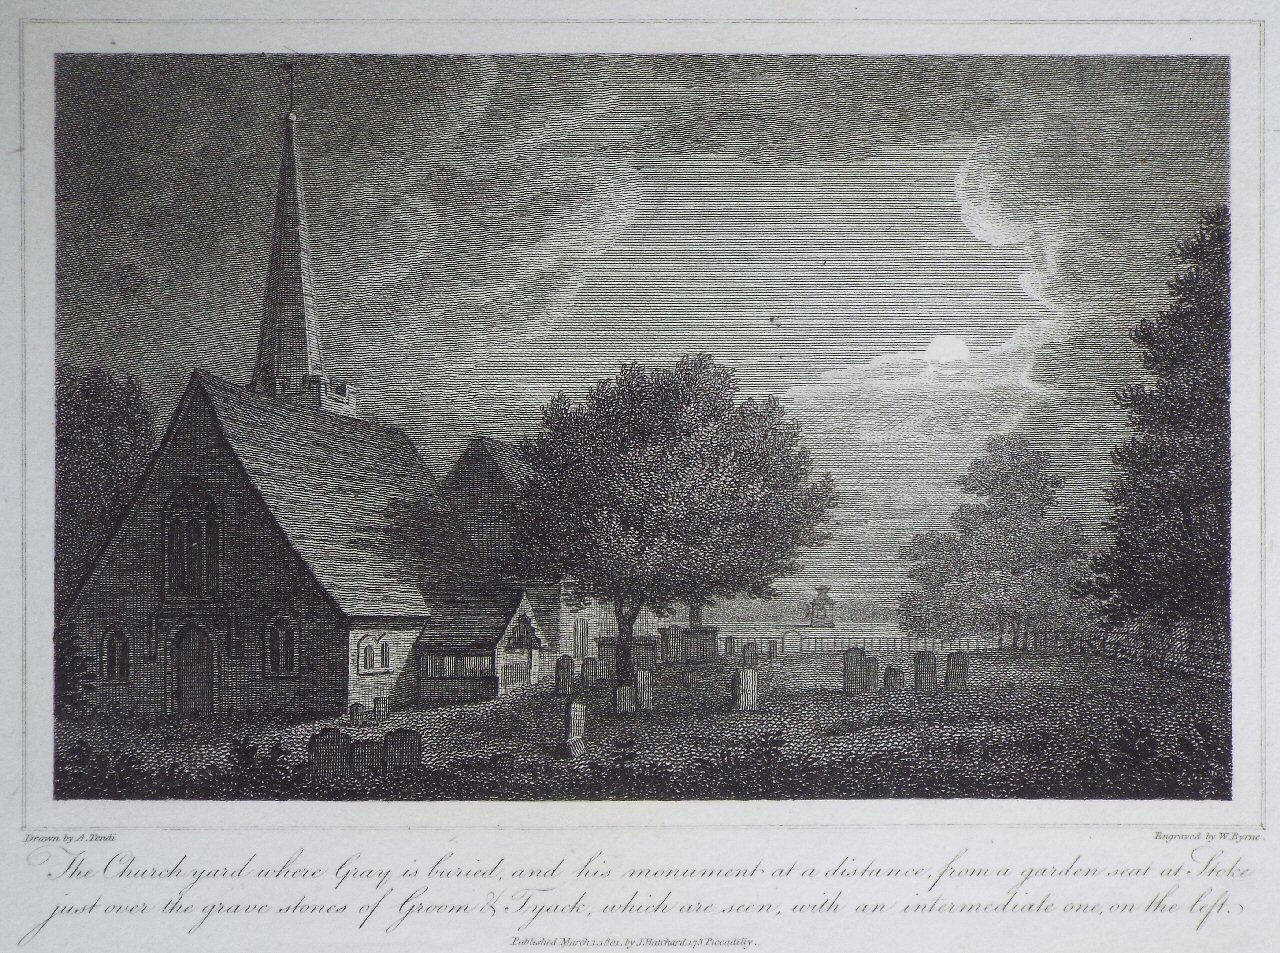 Print - The Church yard where Gray is buried, and his monument at a distance, from a garden seat at Stoke just over the grave stones of Groom & Tyack, which are seen, with an intermediate onr, on the left. - Byrne